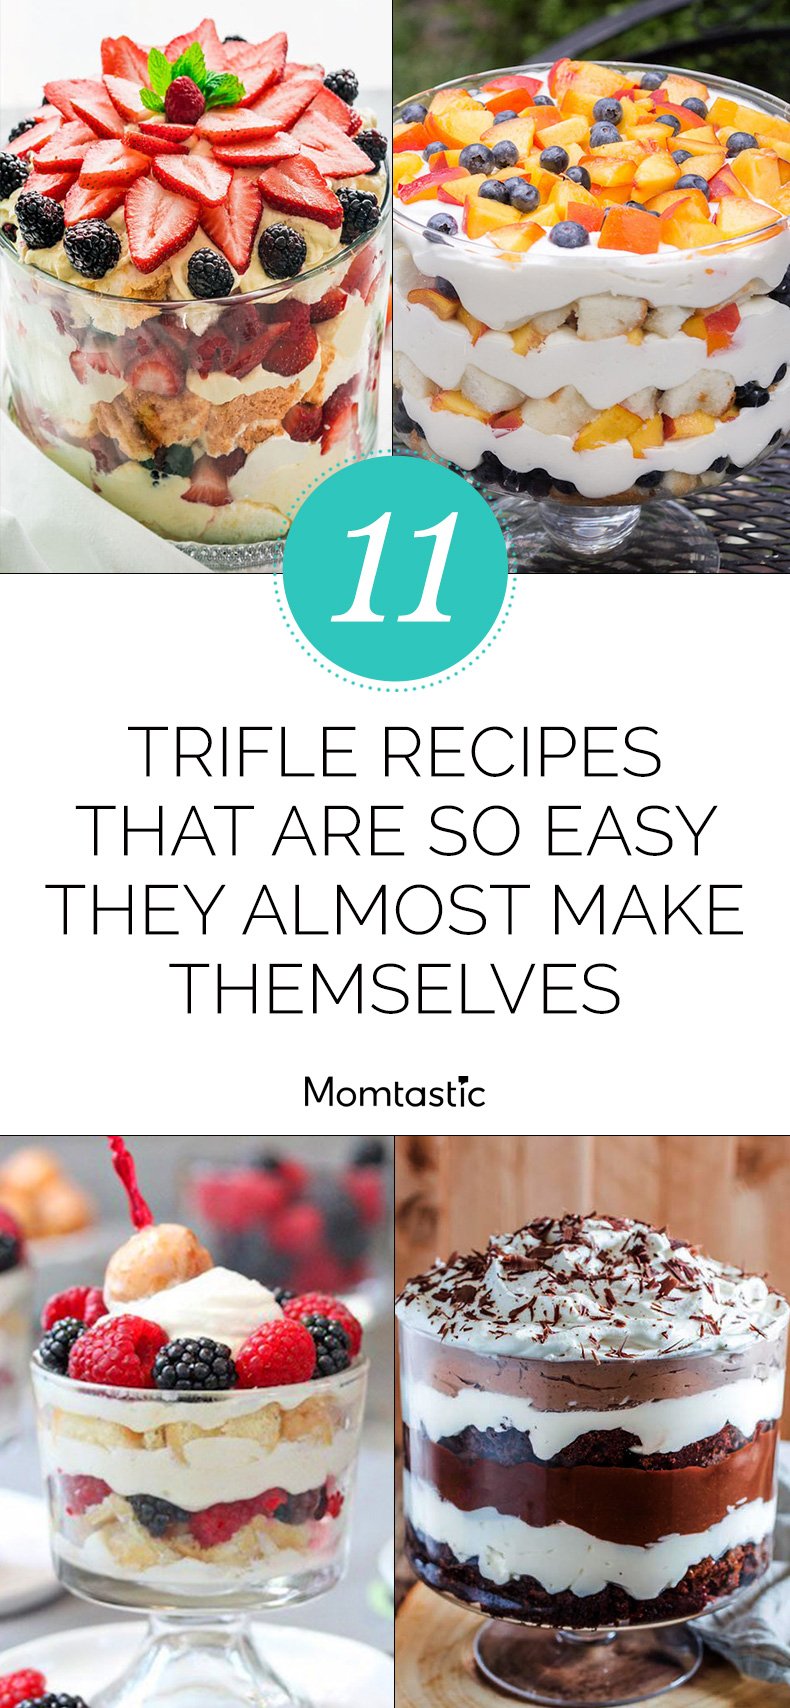 11 Trifle Recipes That Are So Easy They Almost Make Themselves